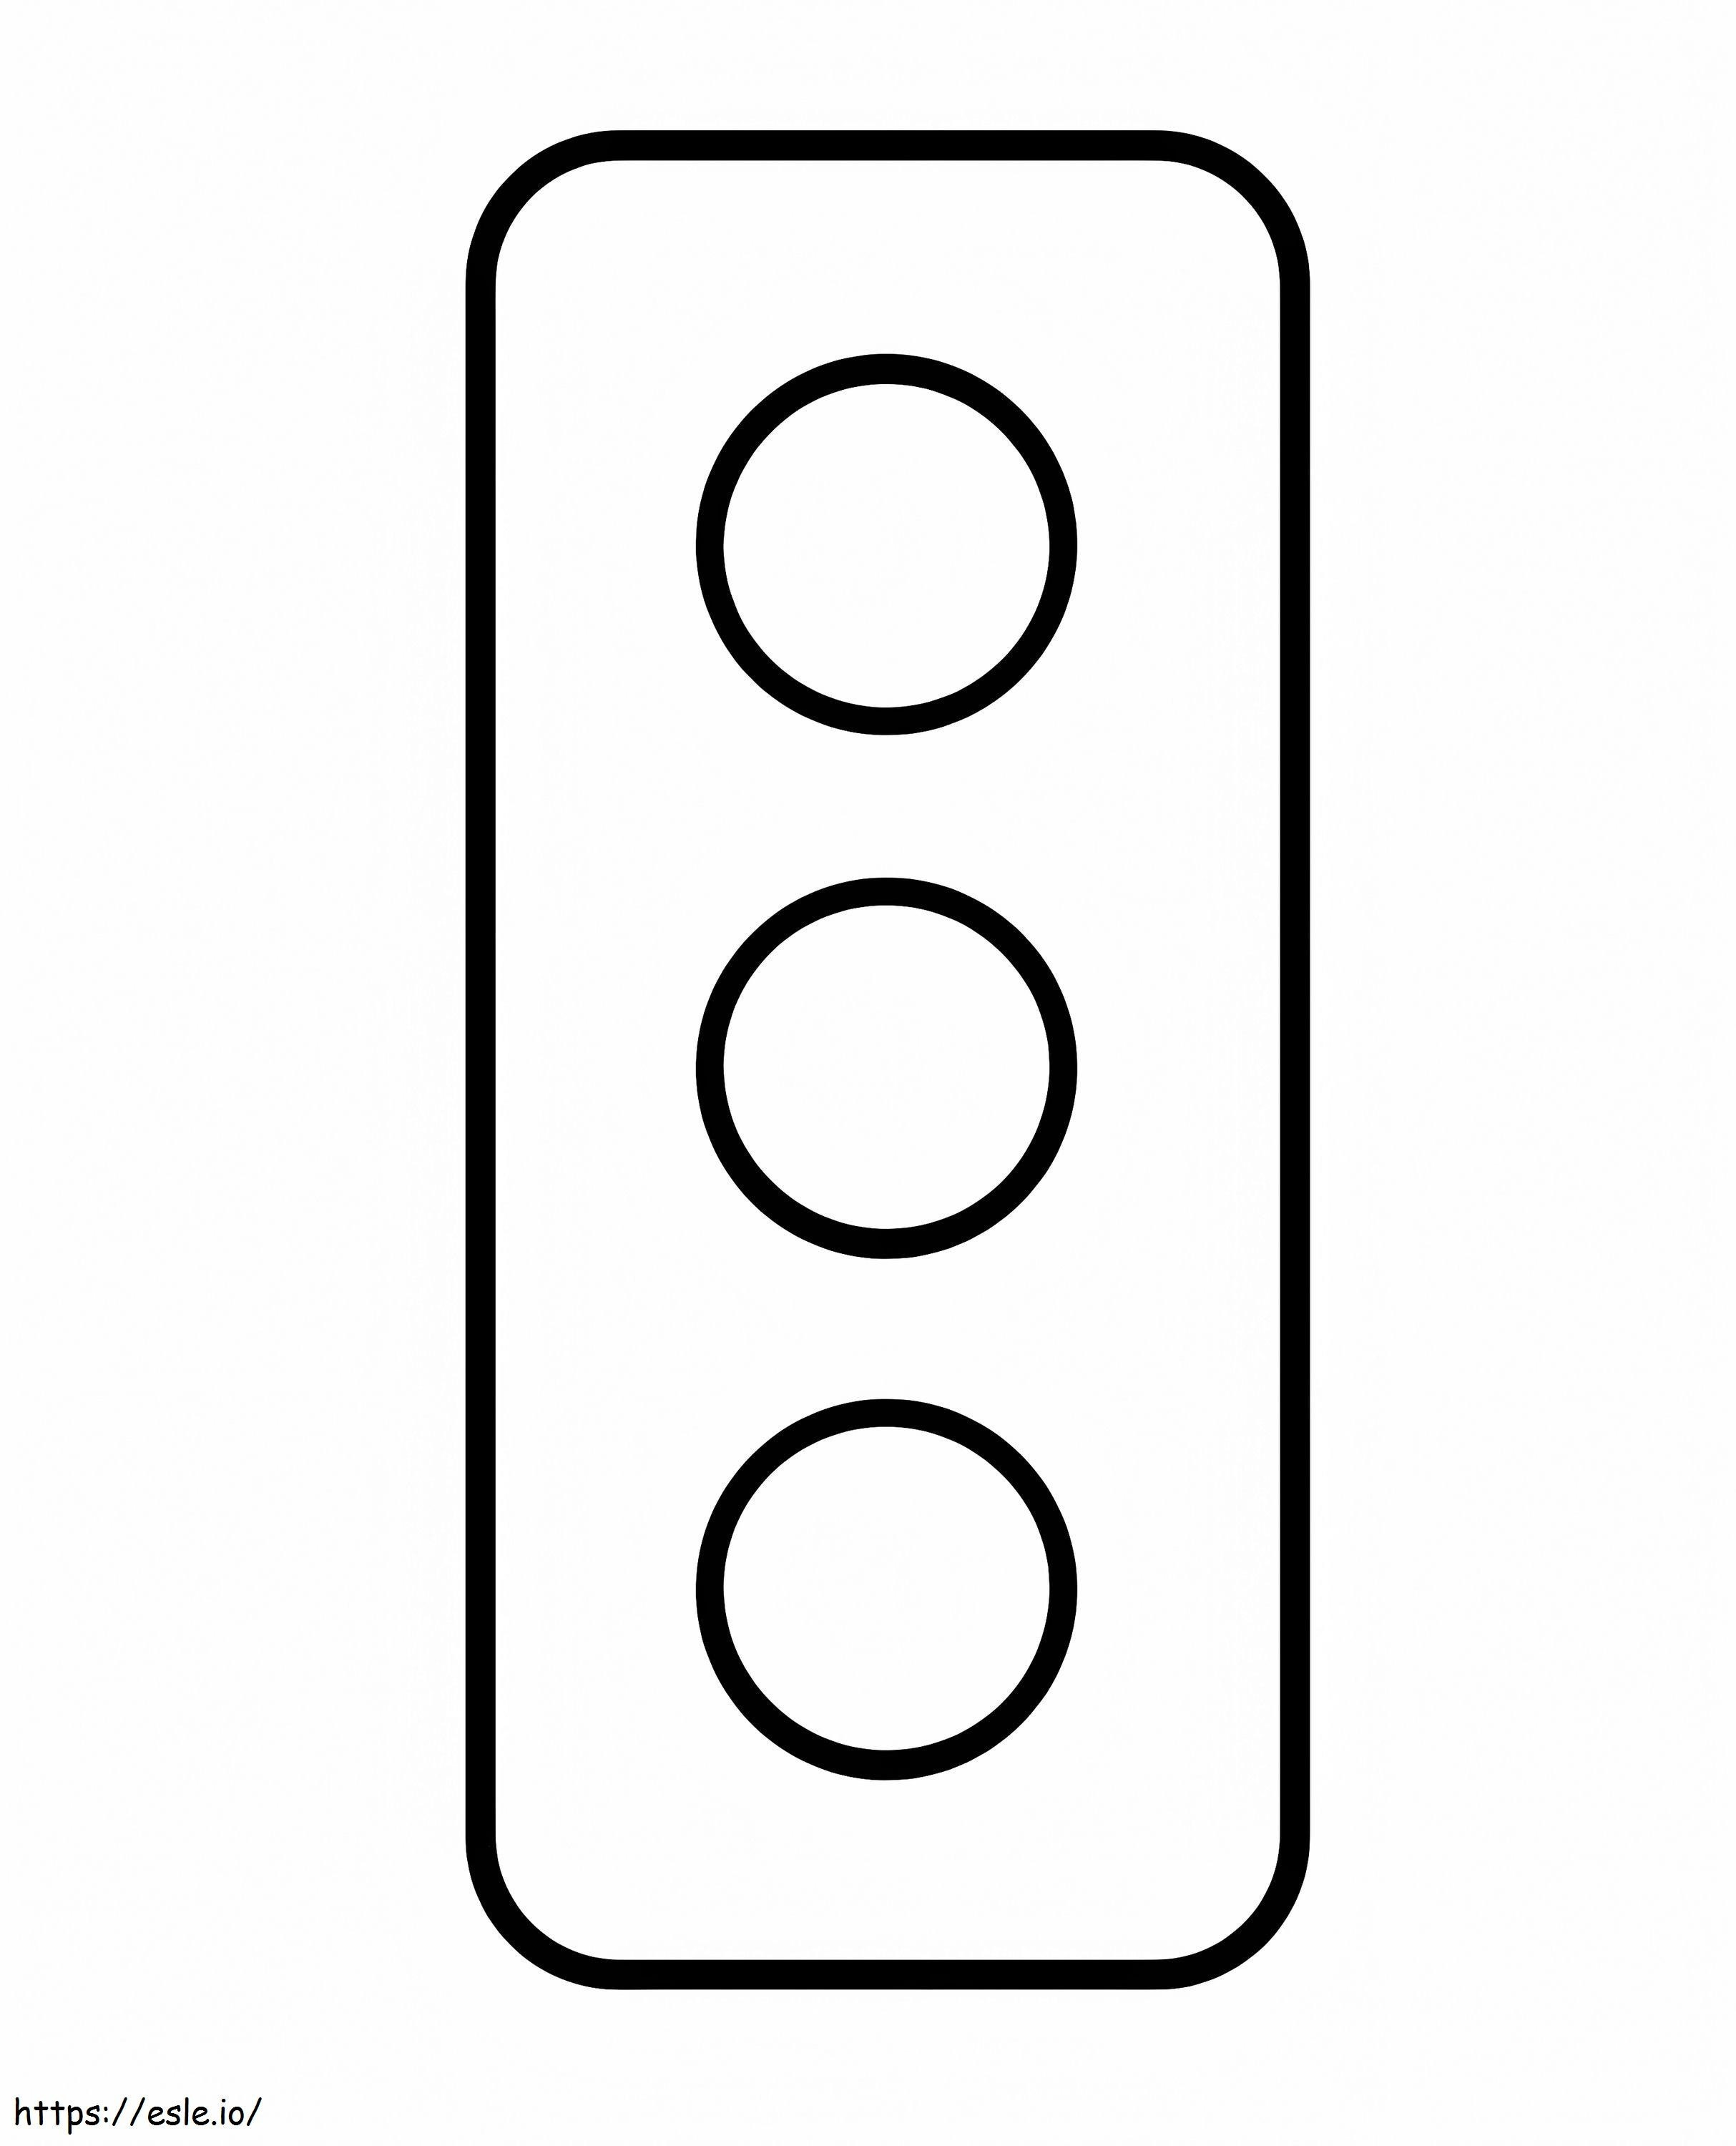 Easy traffic light printable coloring page